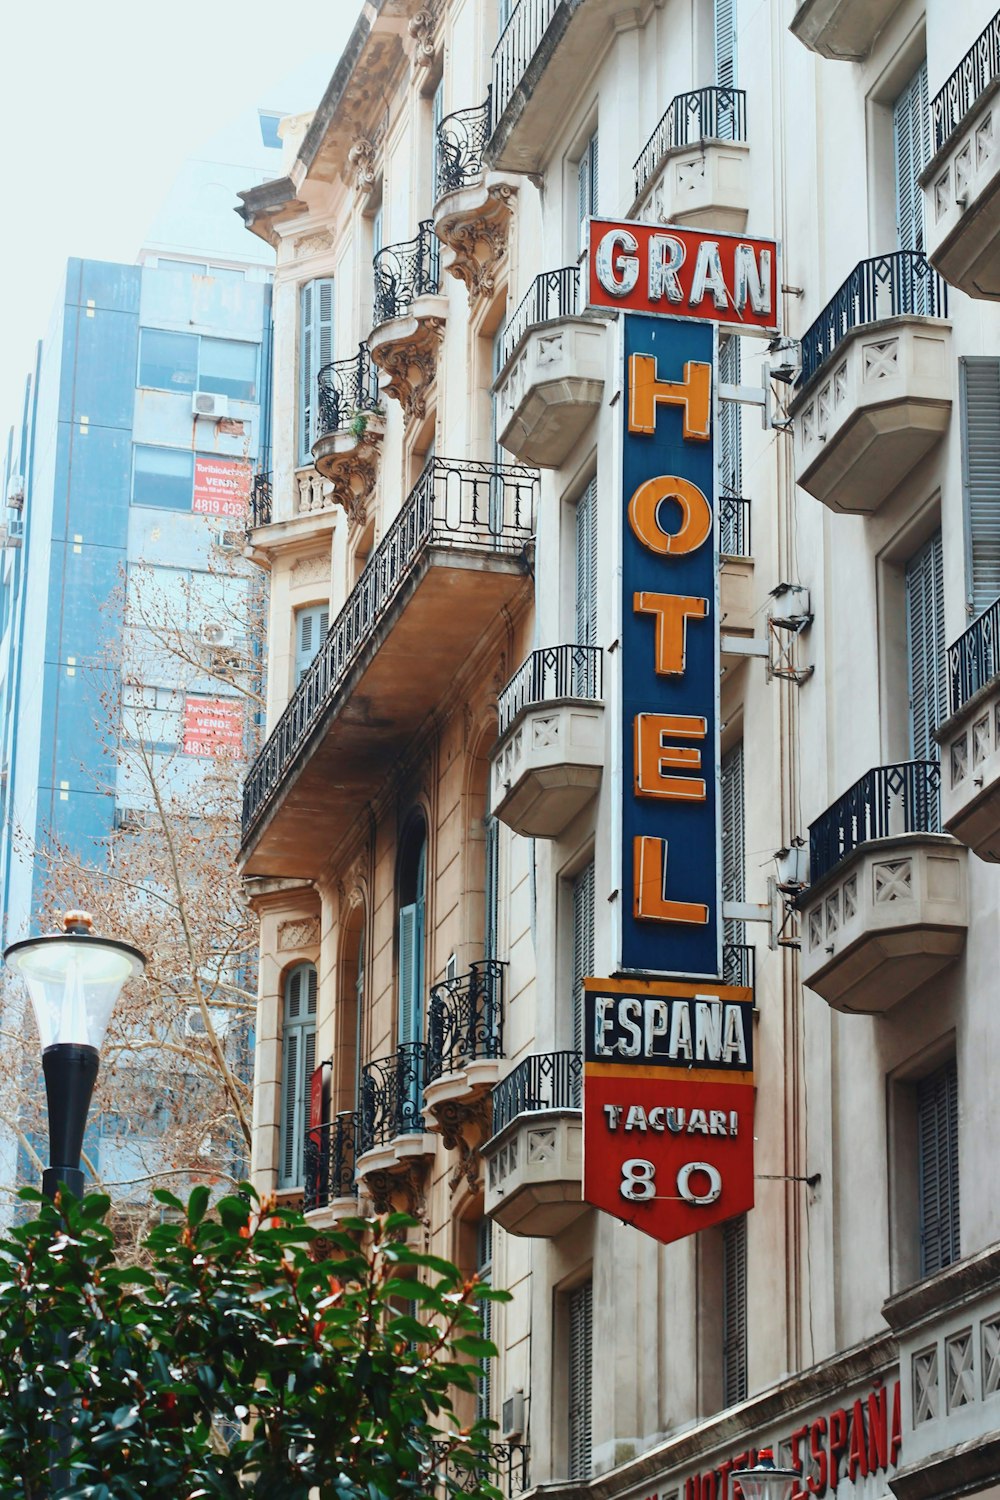 Gran Hotel Espana building during day